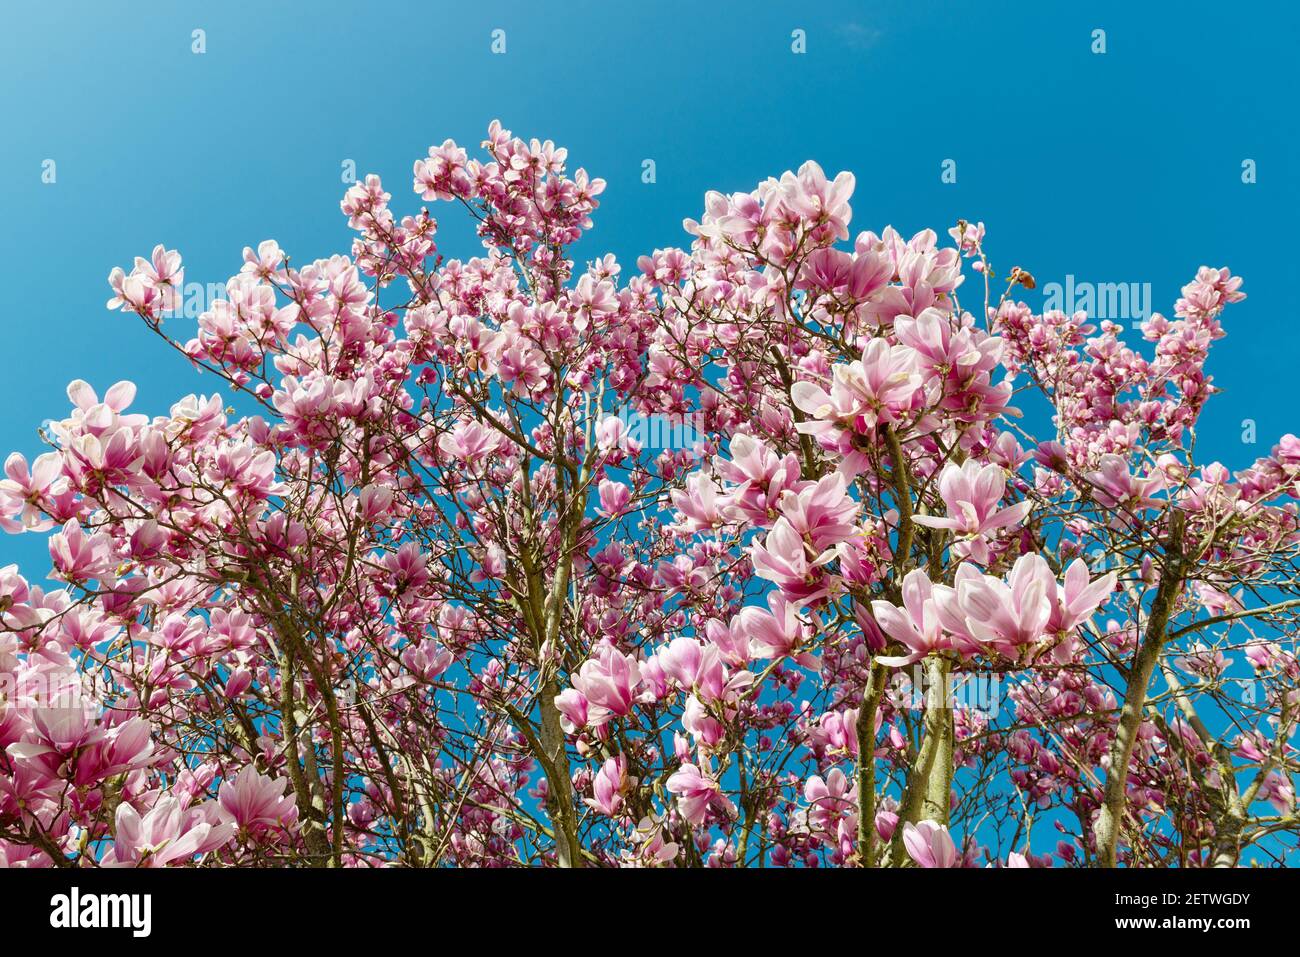 Spectacular pink magnolia flowers in bloom on a blue sky Stock Photo